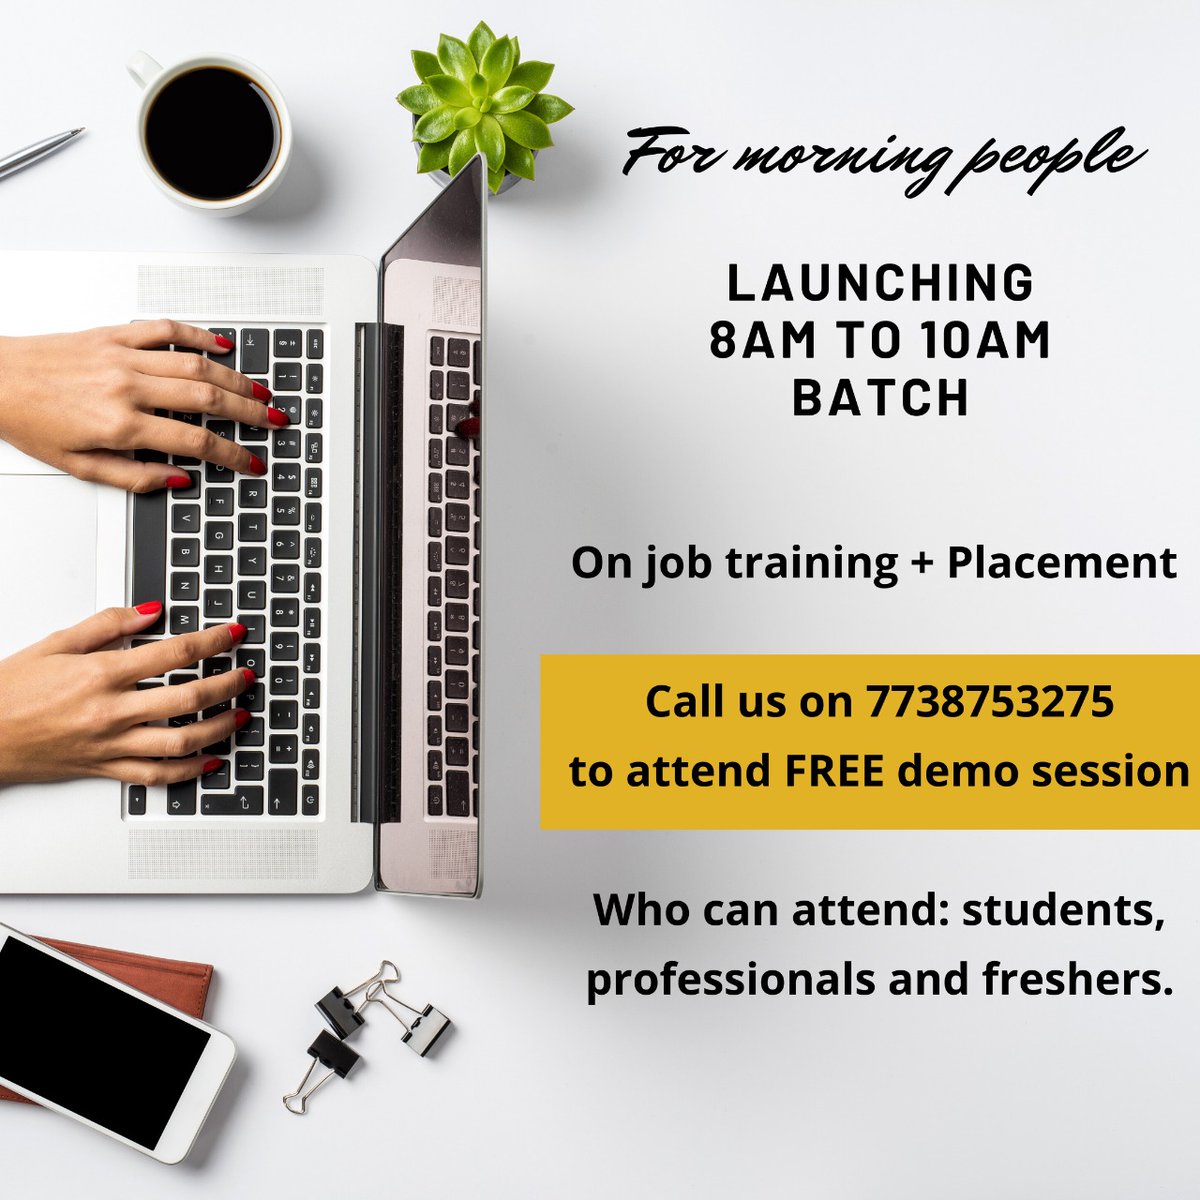 We understand your schedule. Hence we have designed special digital marketing courses as per your timings. So that you can enhance the skills and grow in your career multifold.
#MorningBatch #StartingSoon #HurryUp #Enhanceyourskills #RegisterNow